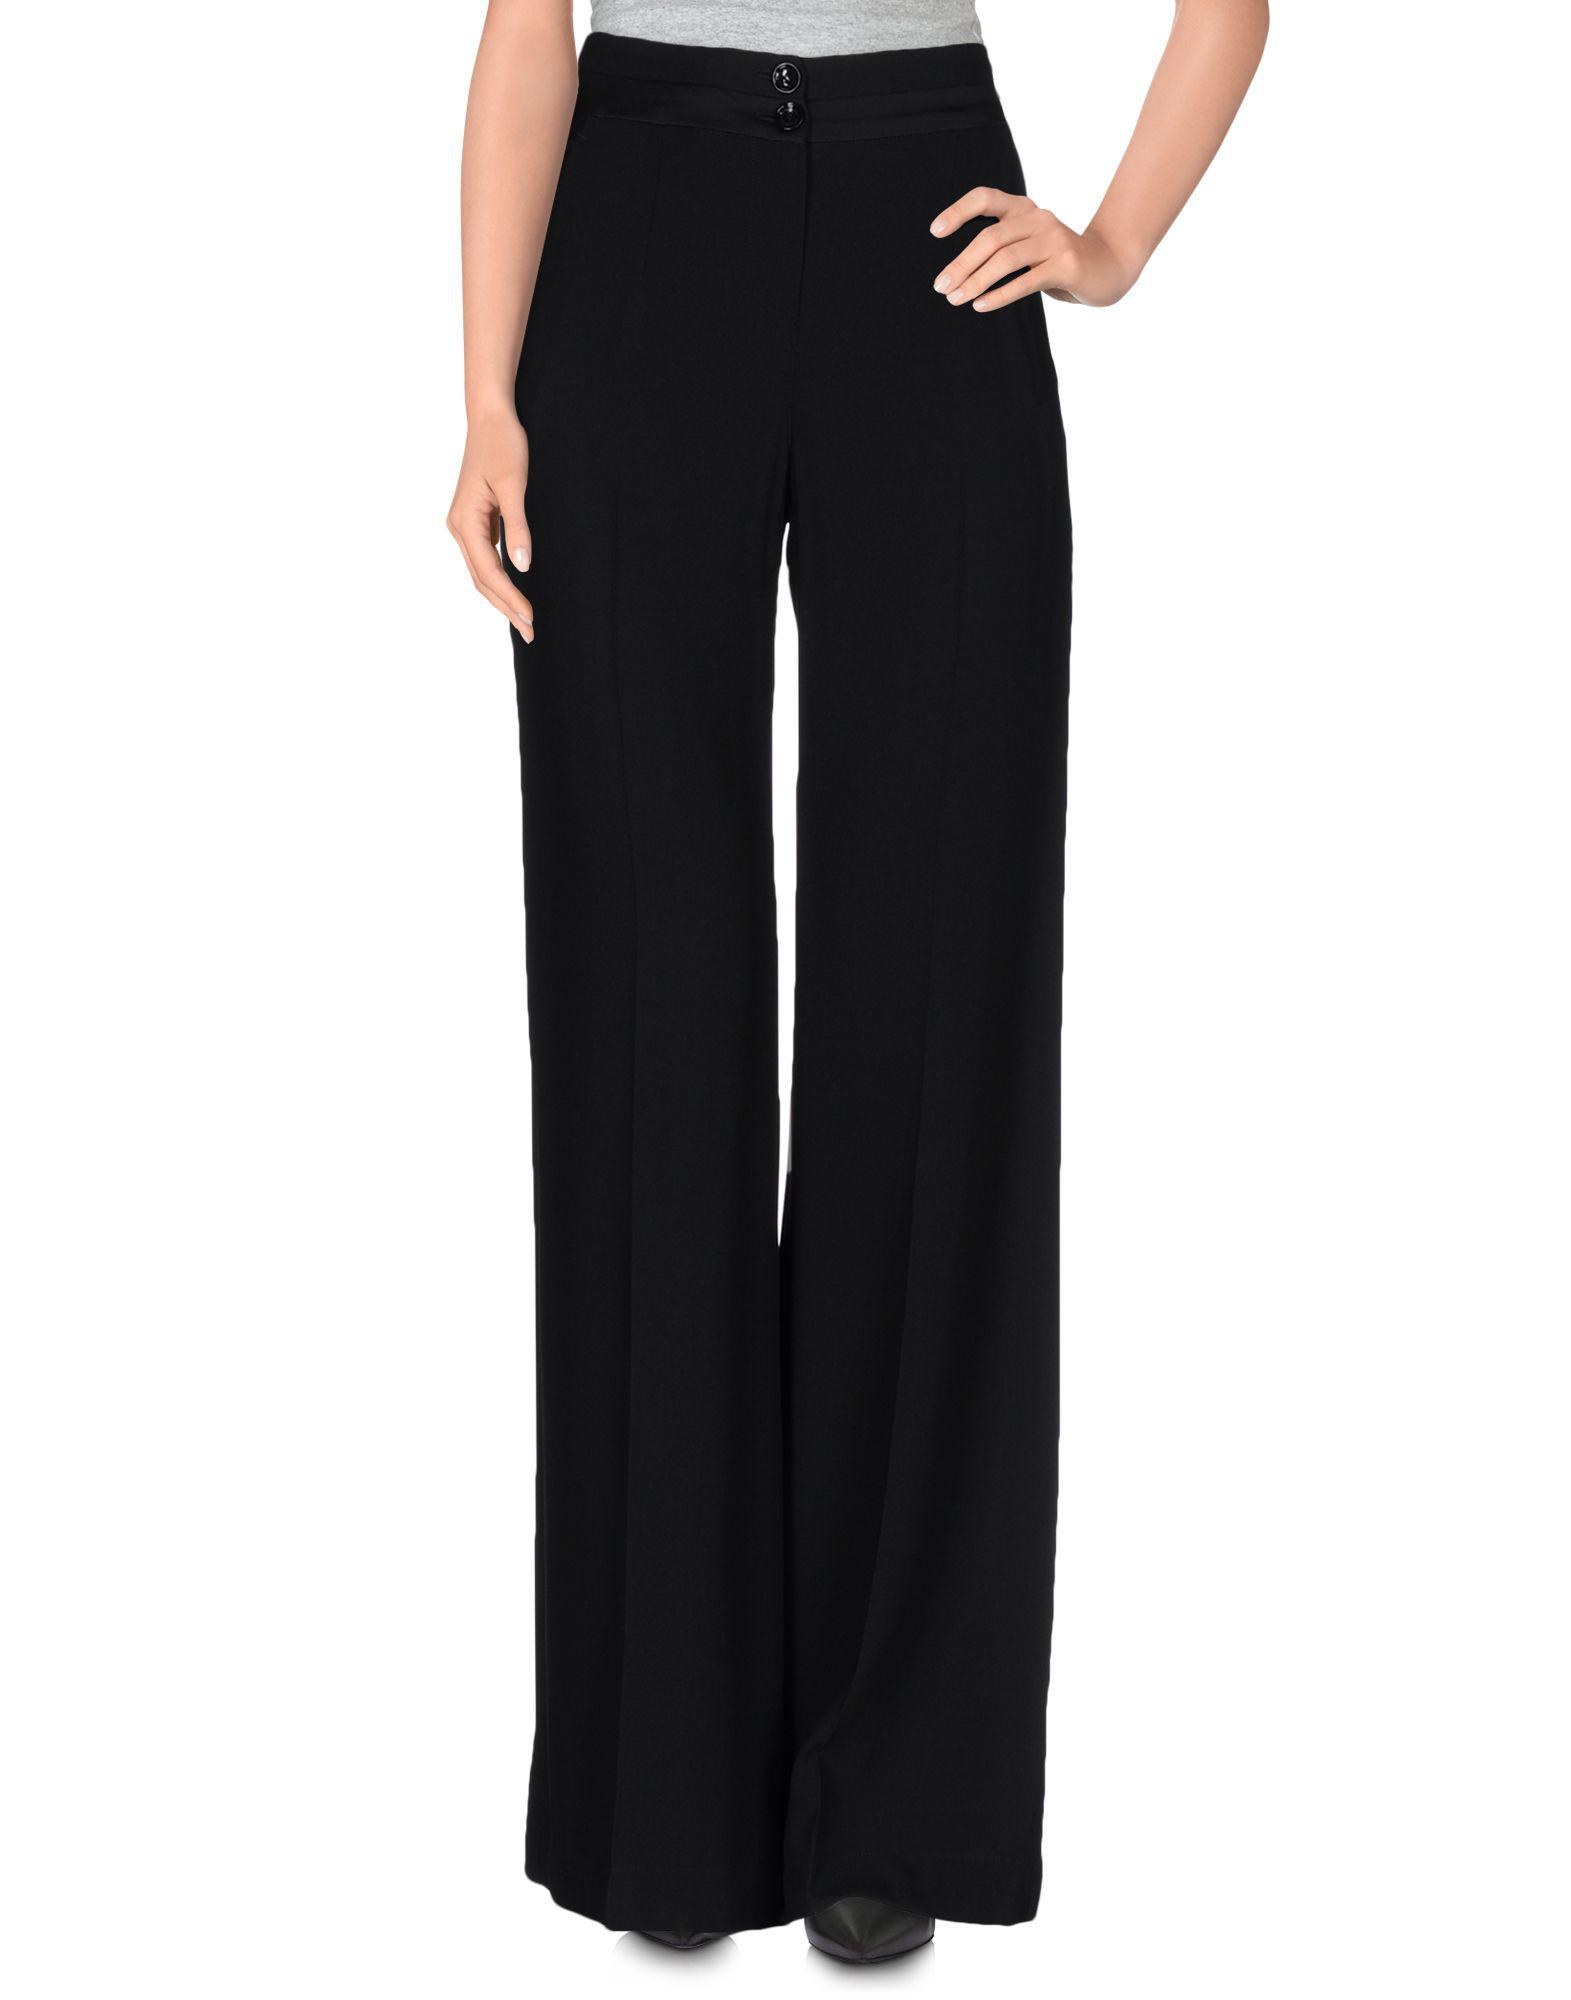 Patrizia Pepe Synthetic Casual Trouser in Black - Lyst